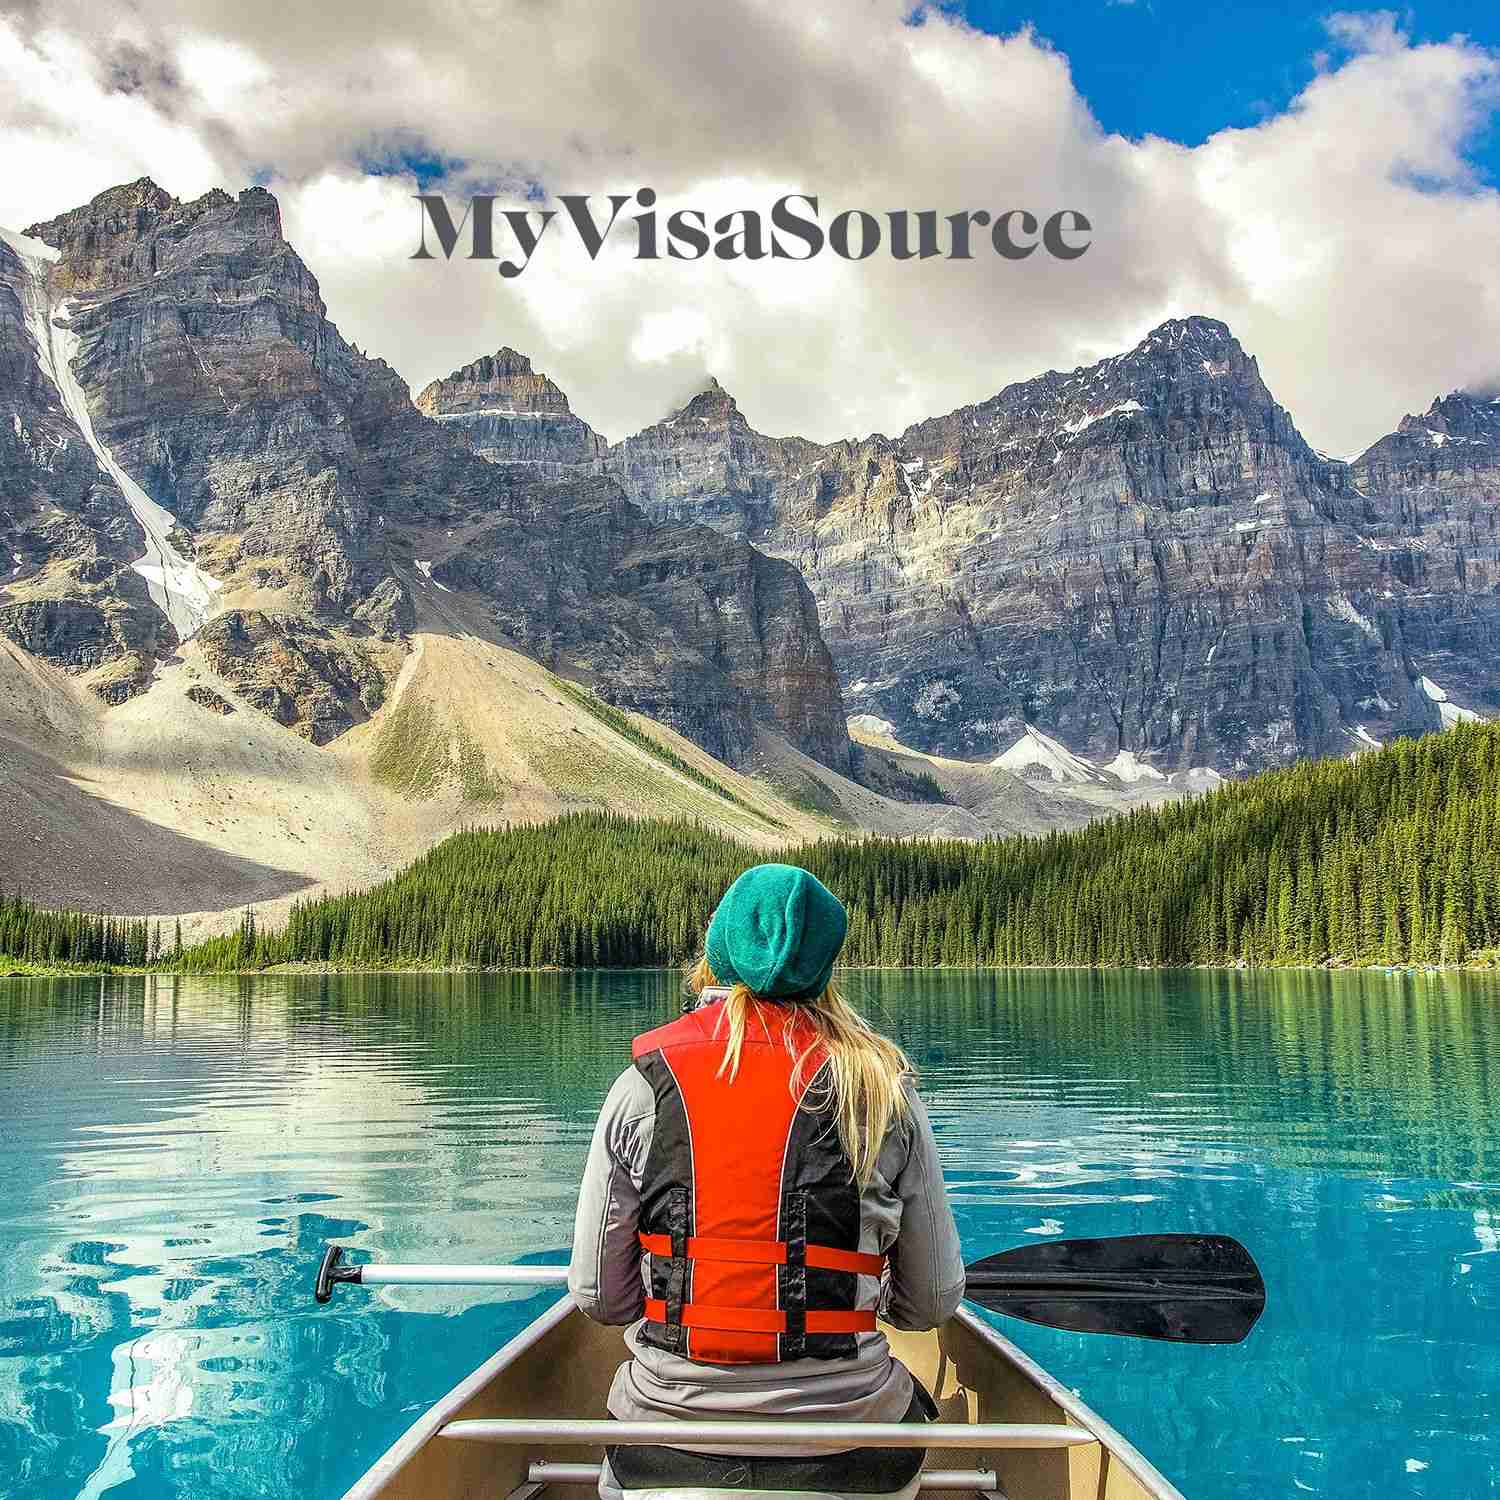 canoeing in a beautiful lake with a mountain view my visa source